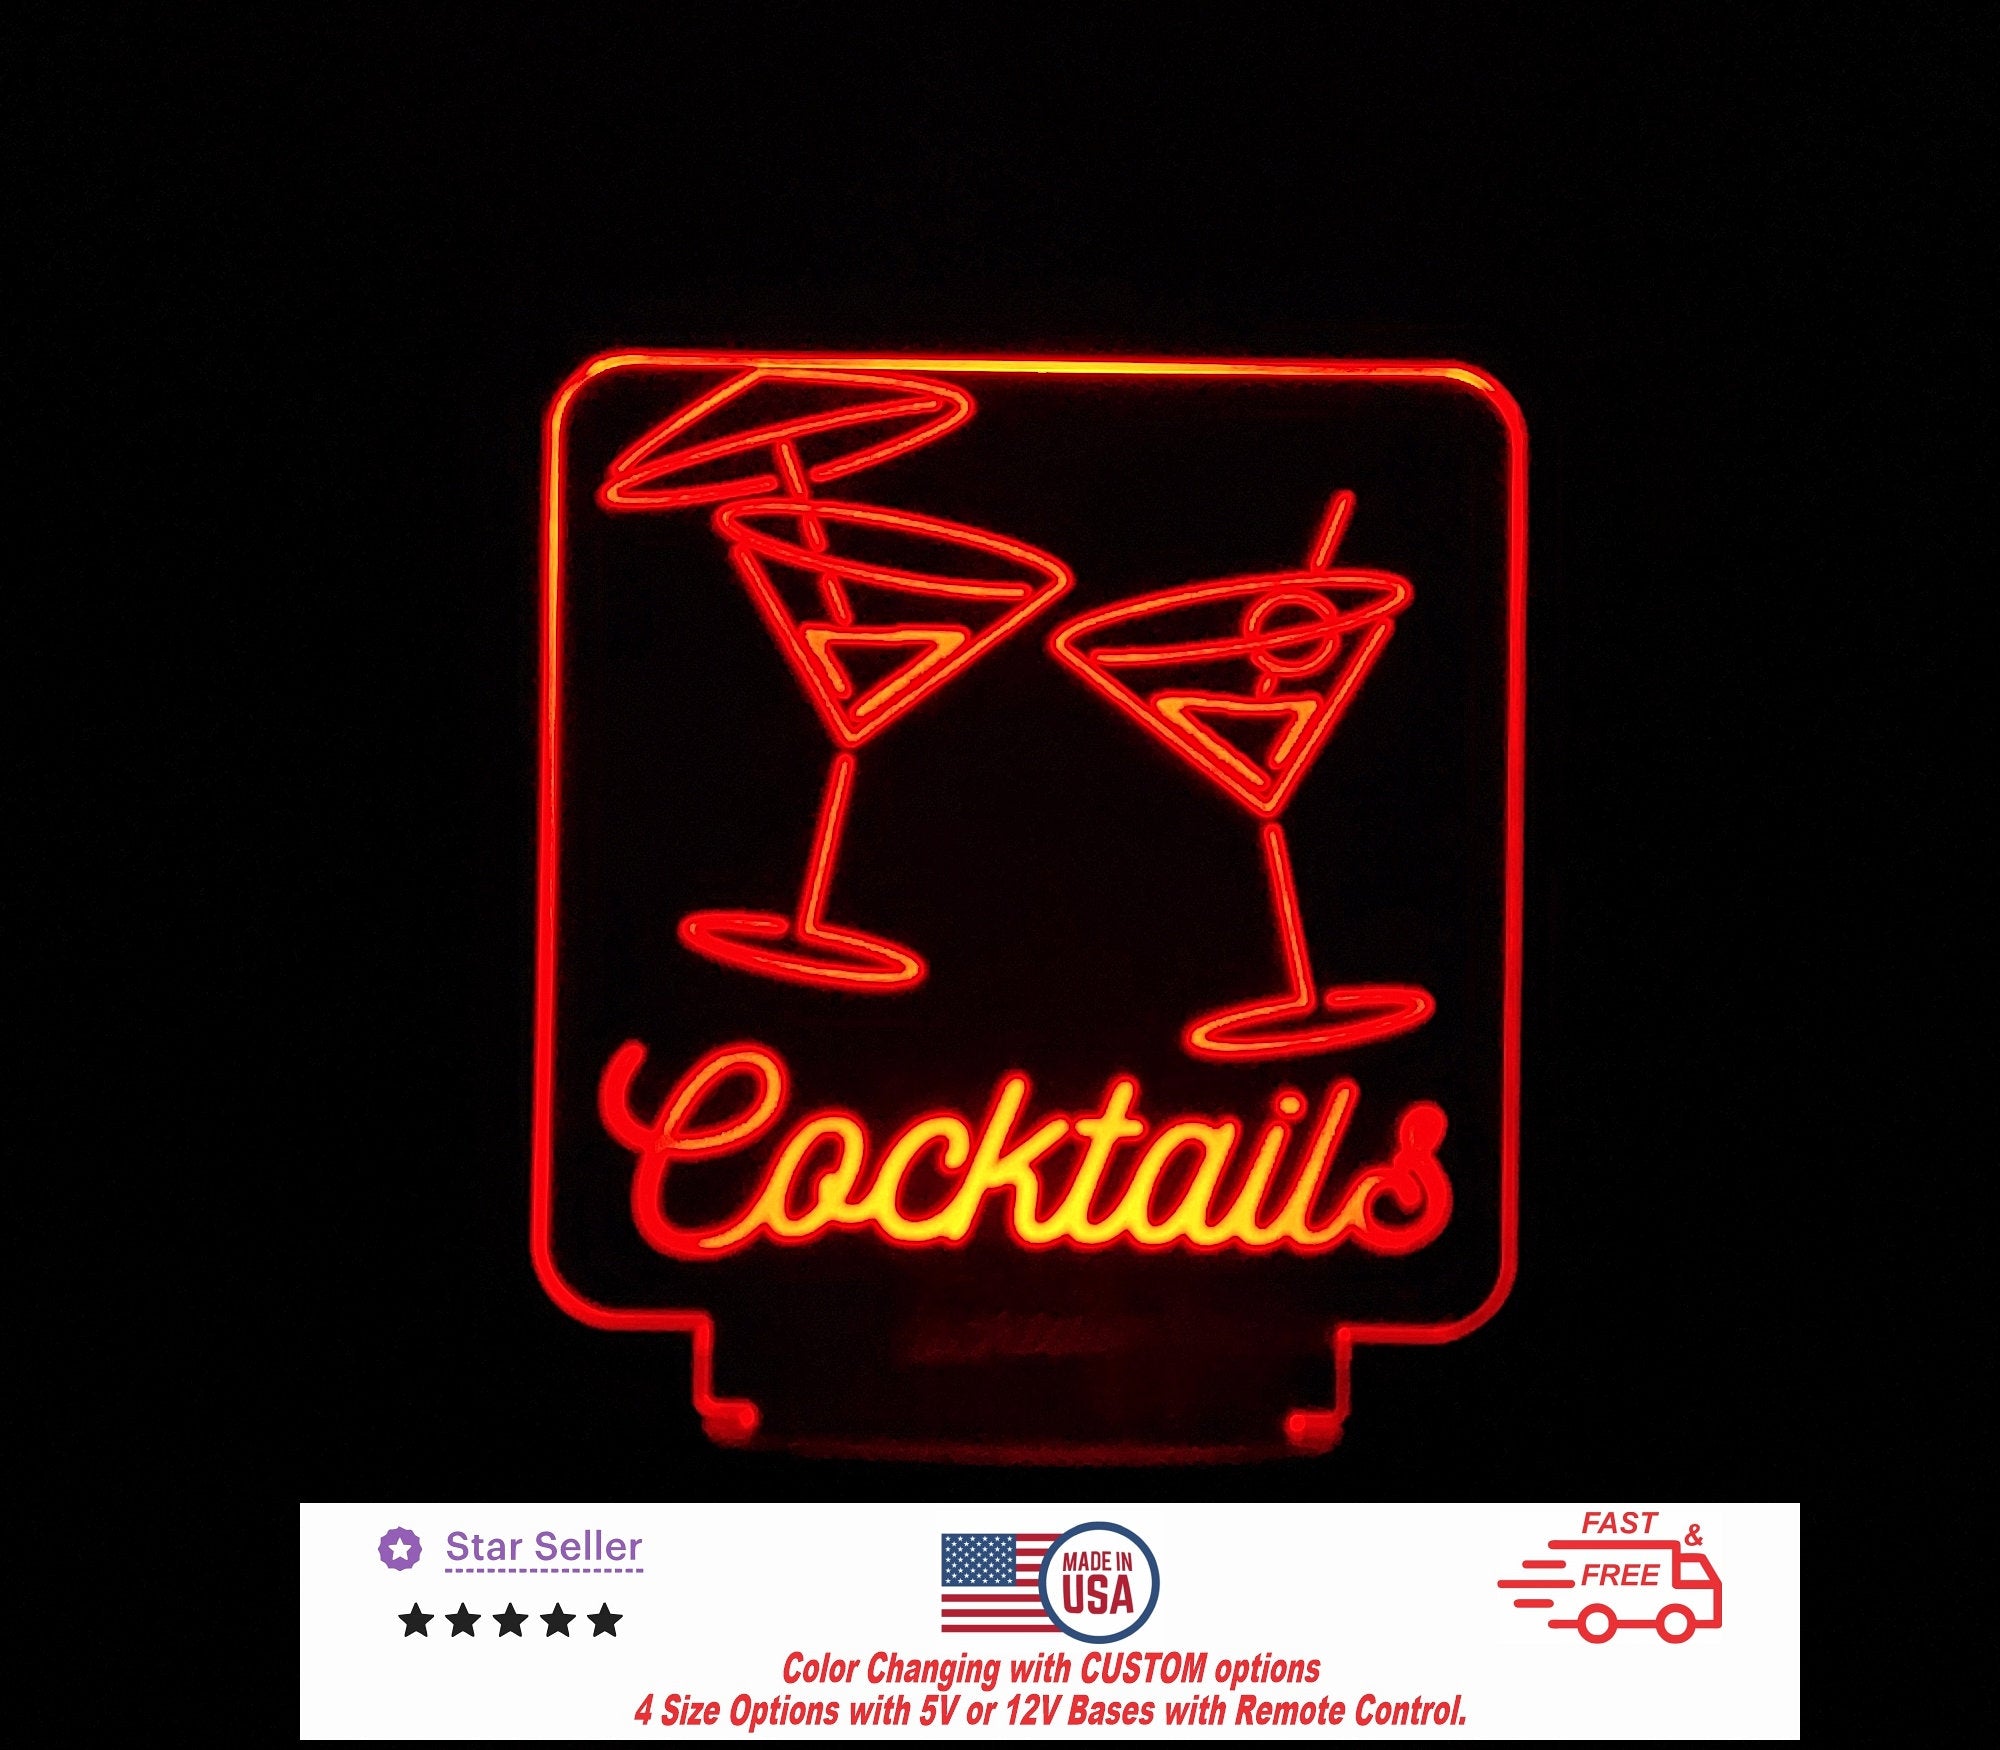 Cocktails Bar LED Sign Personalized Night Light, Custom Neon Bar Sign - Cocktail Sign - 4 Sizes Free Shipping Made in USA